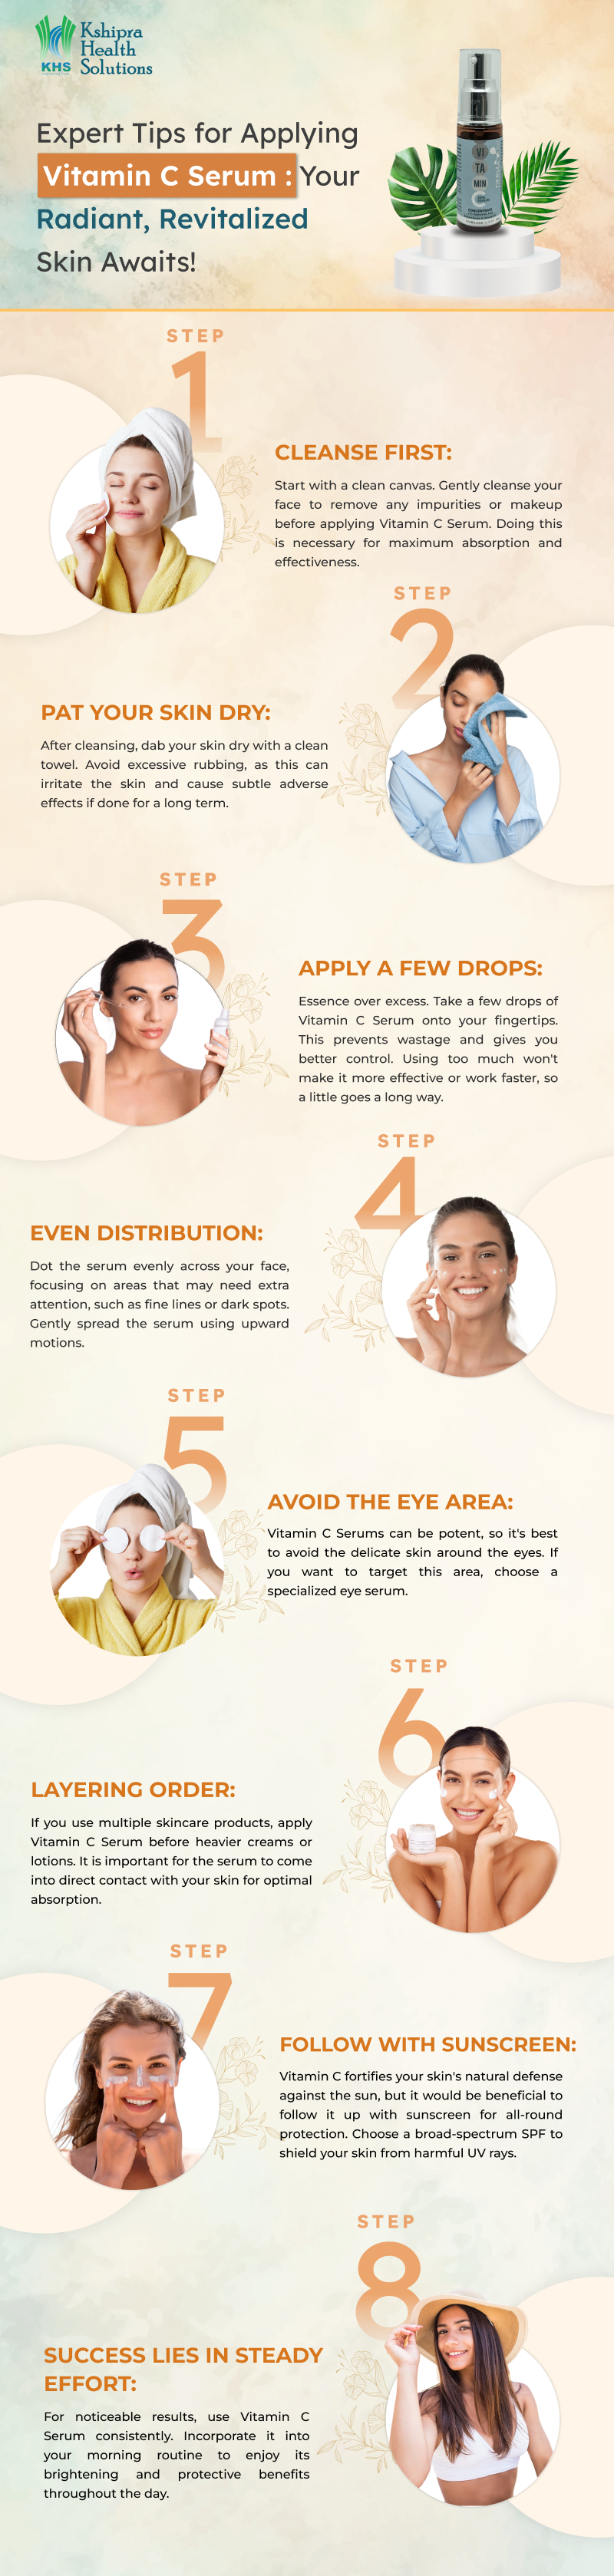 best vitamin c serum recommended by dermatologists infographic